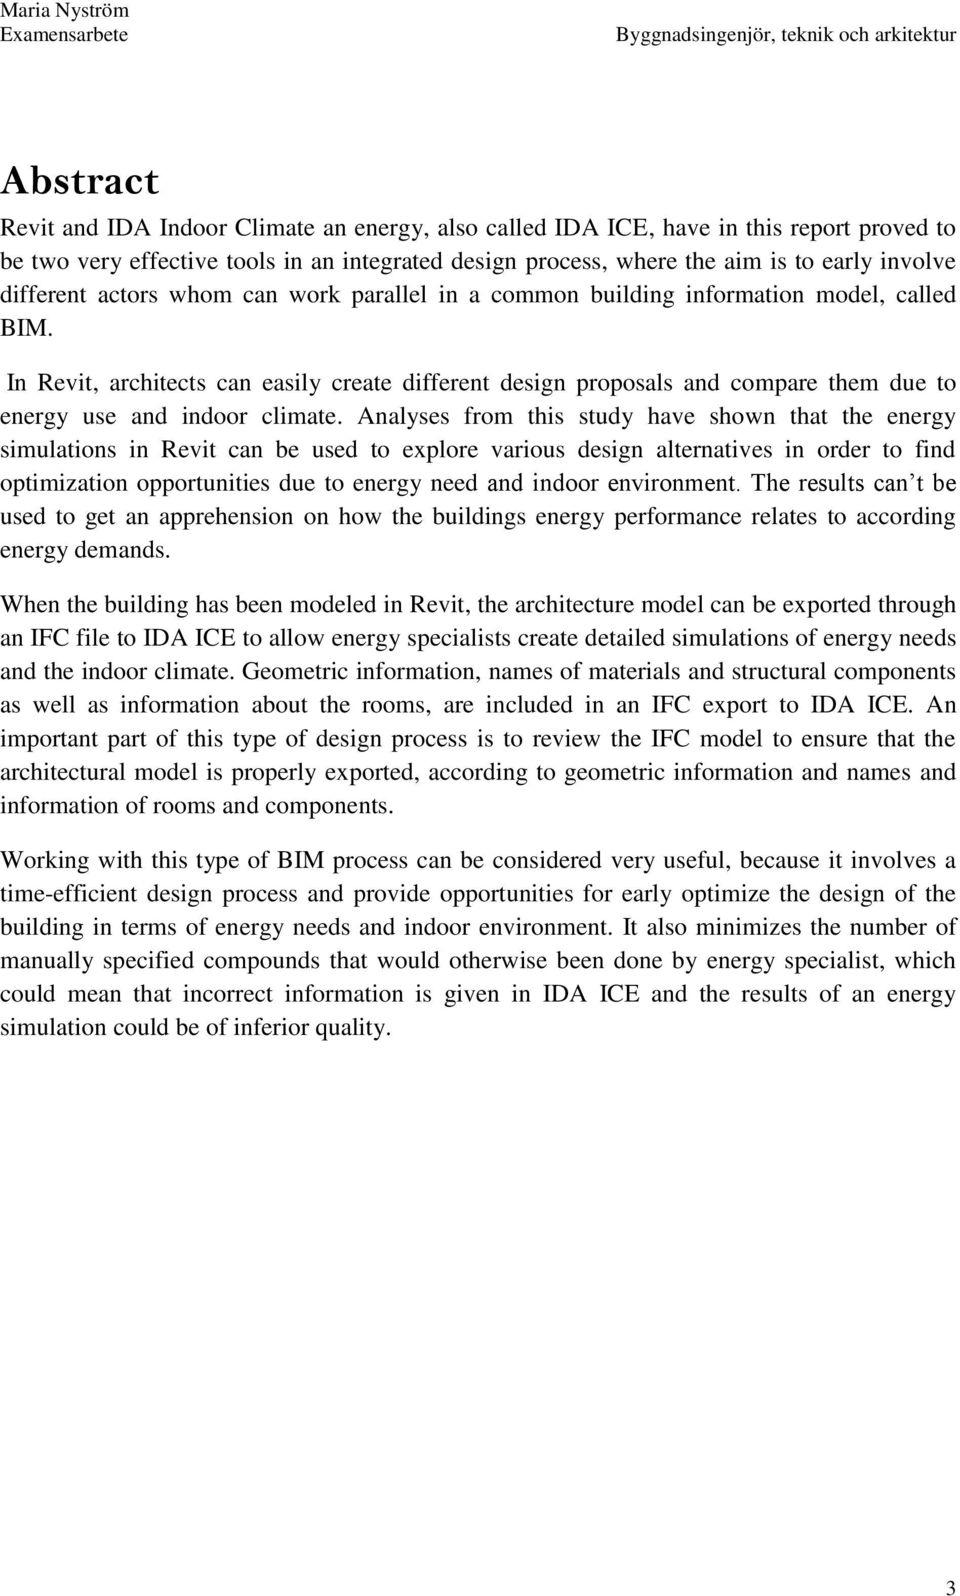 In Revit, architects can easily create different design proposals and compare them due to energy use and indoor climate.